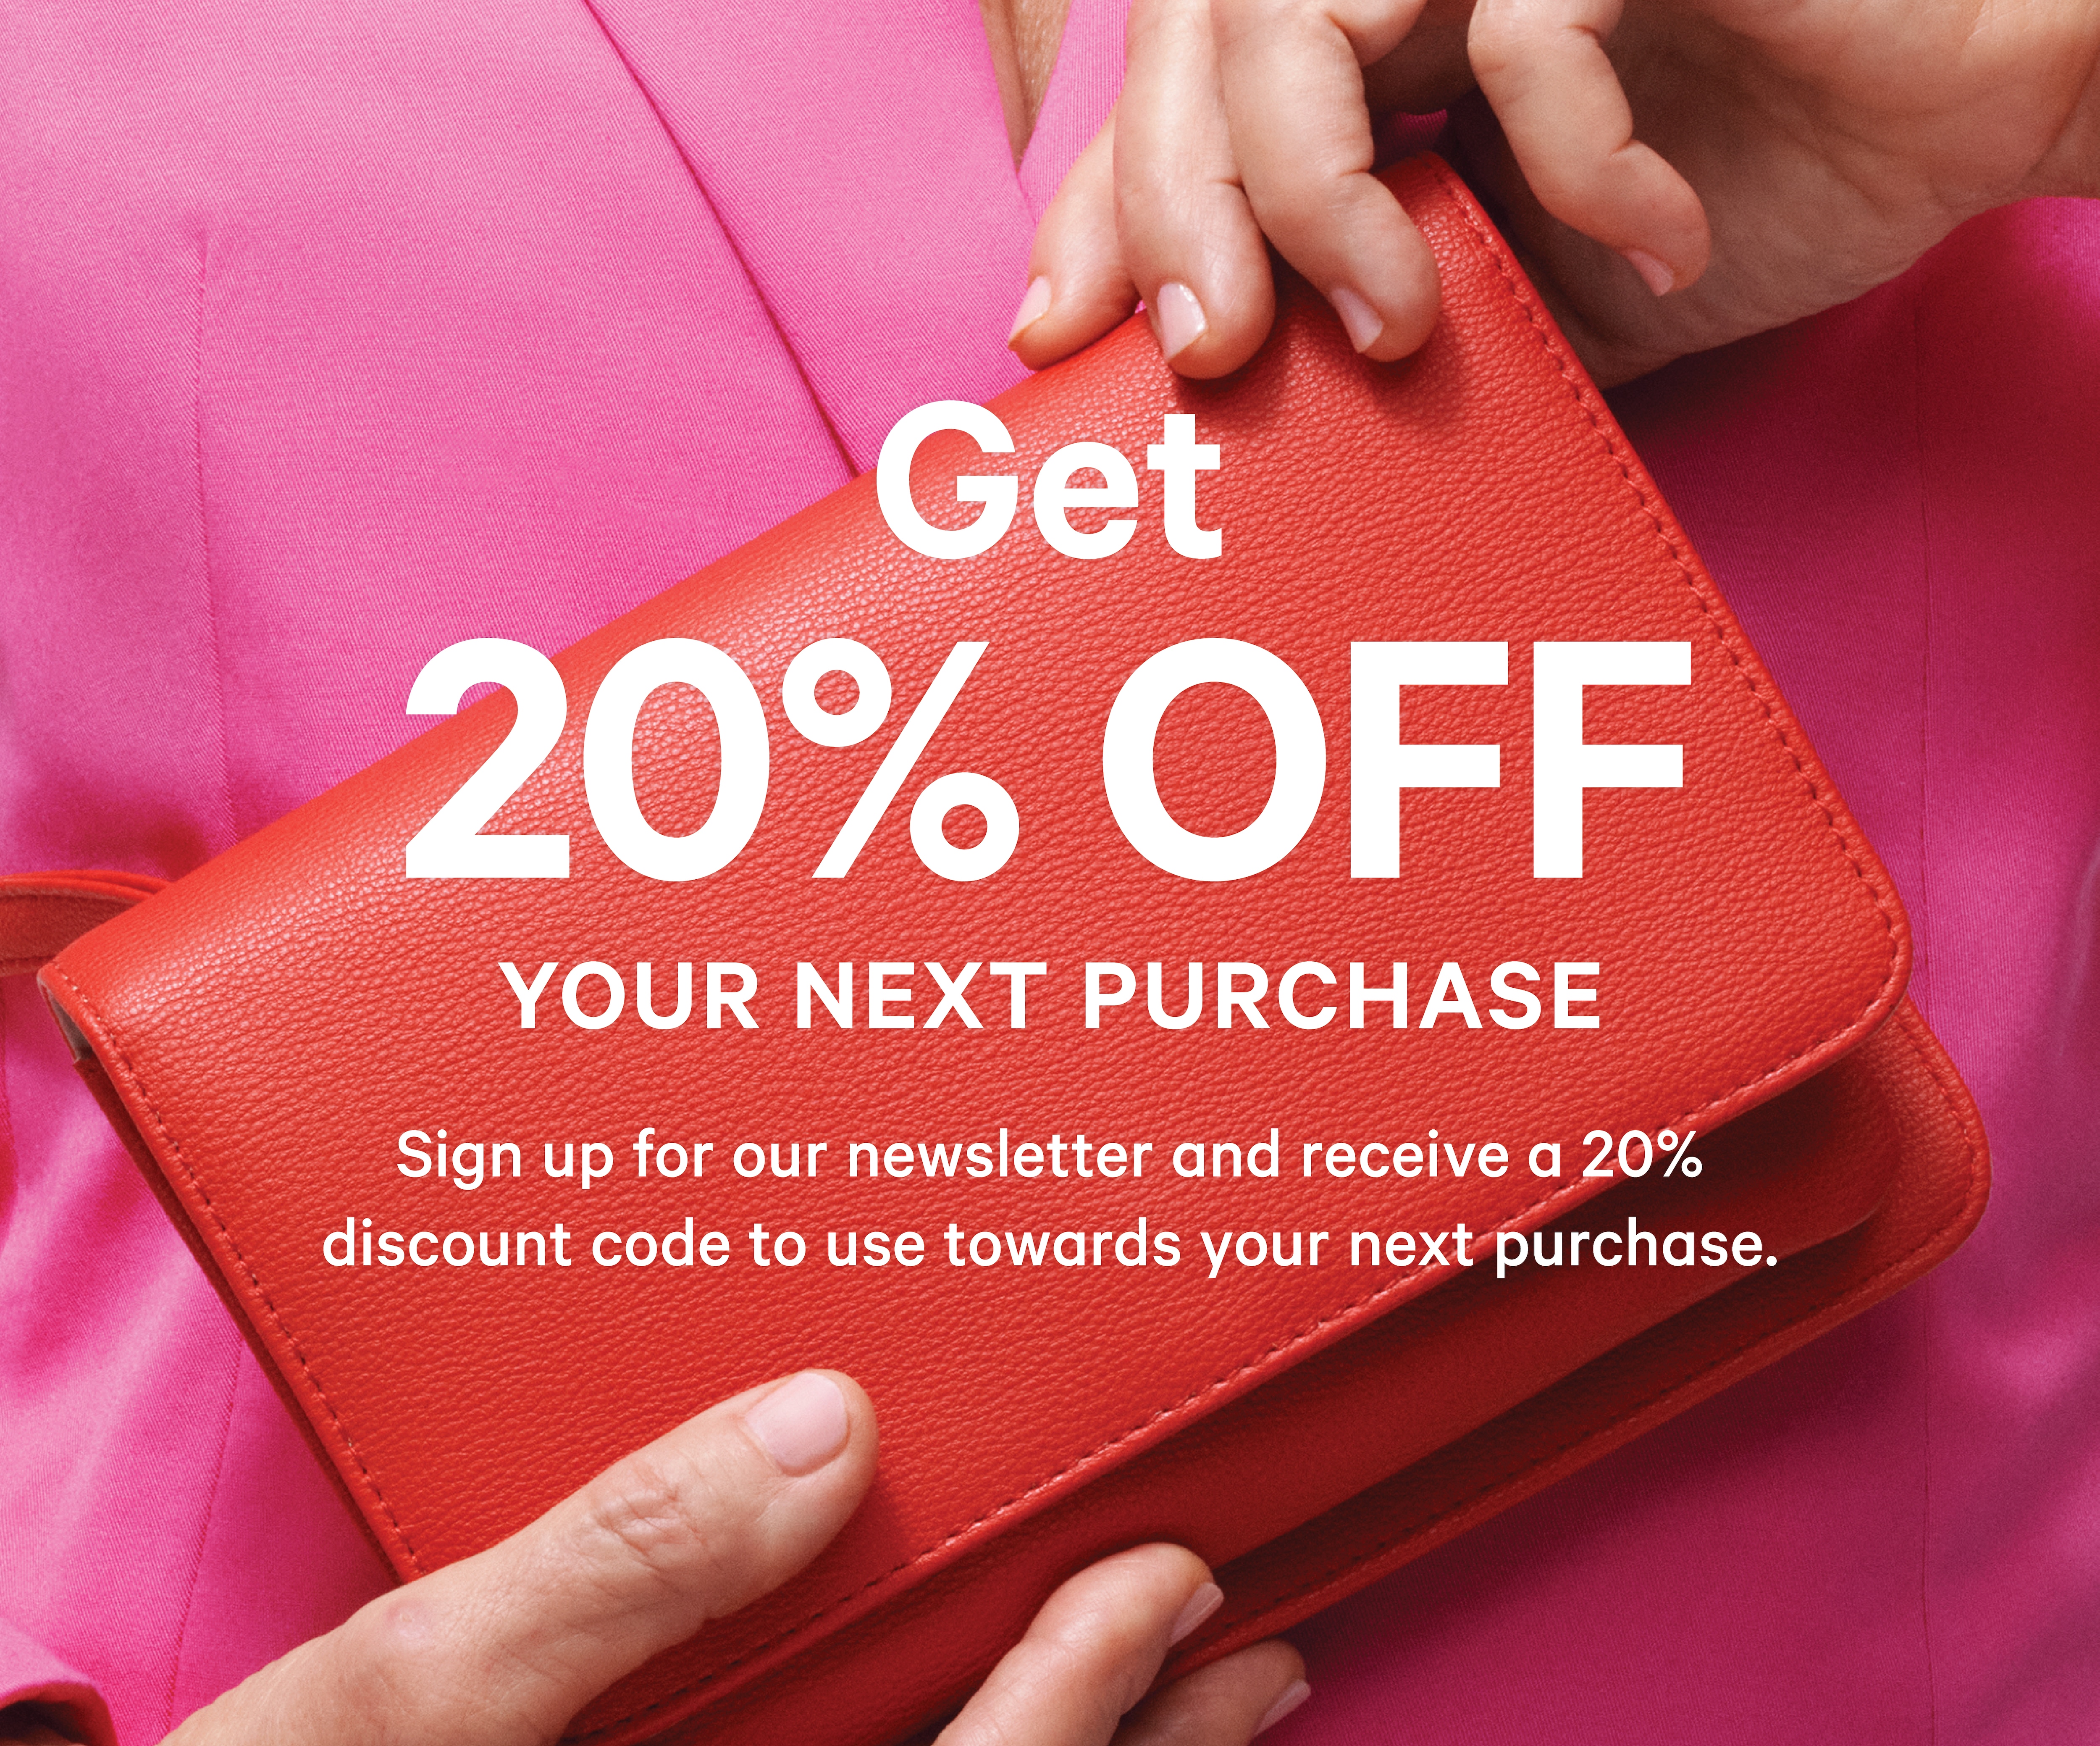 Get 20% off your next purchase. Sign up for our newsletter and receive a 20% discount code to use towards your next purchase. Happy Shopping!